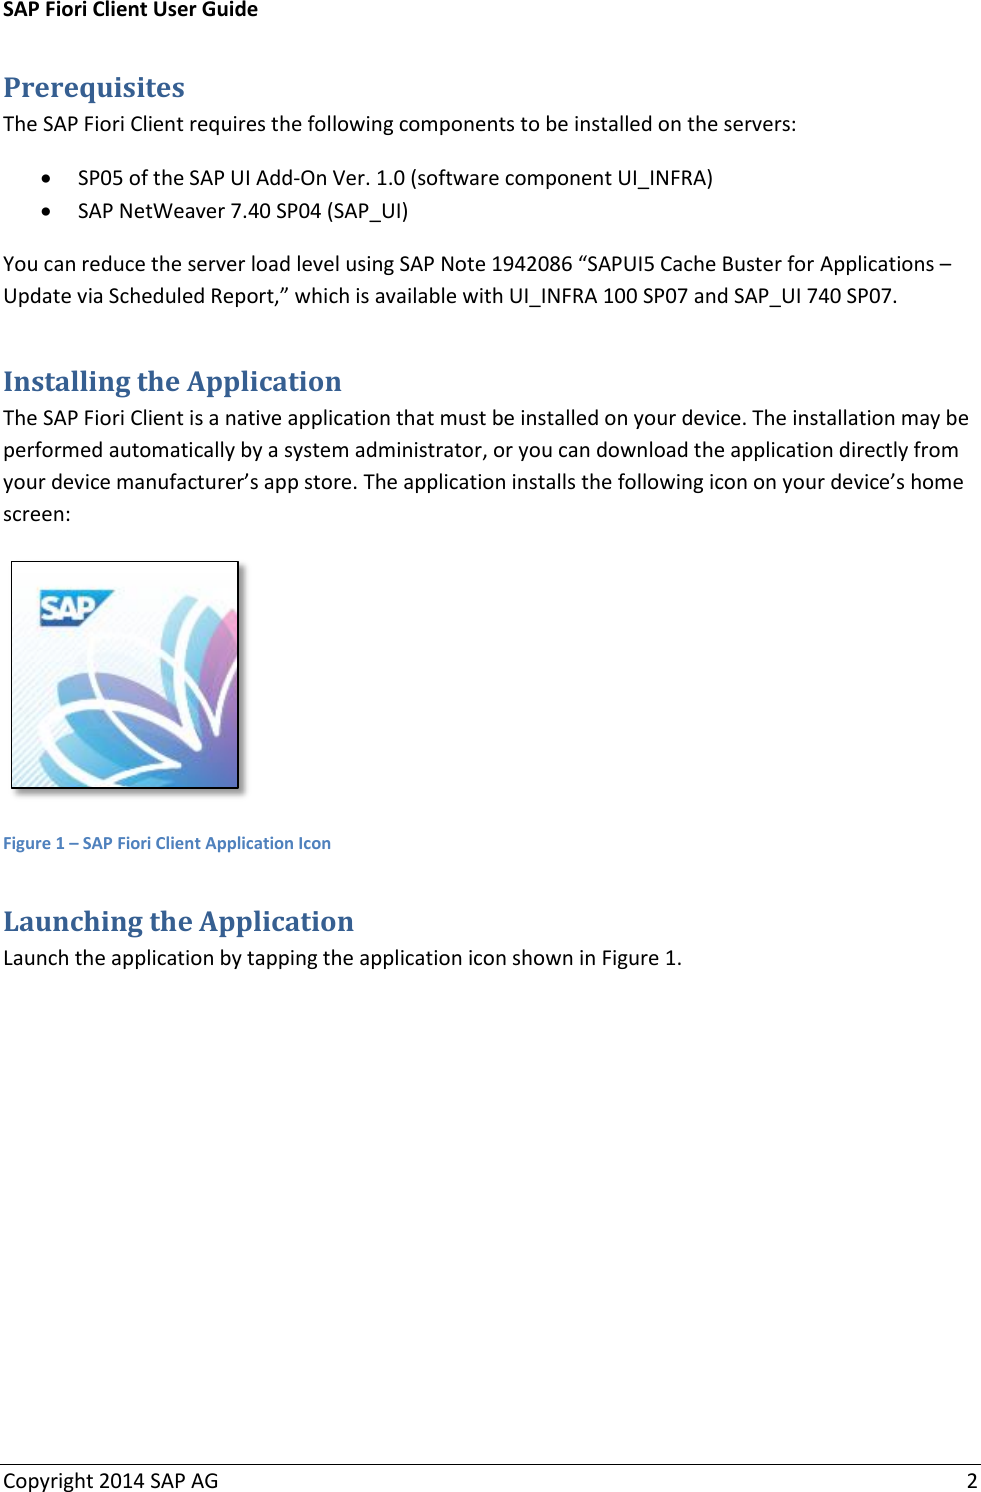 Page 3 of 12 - SAP Fiori Client User Guide